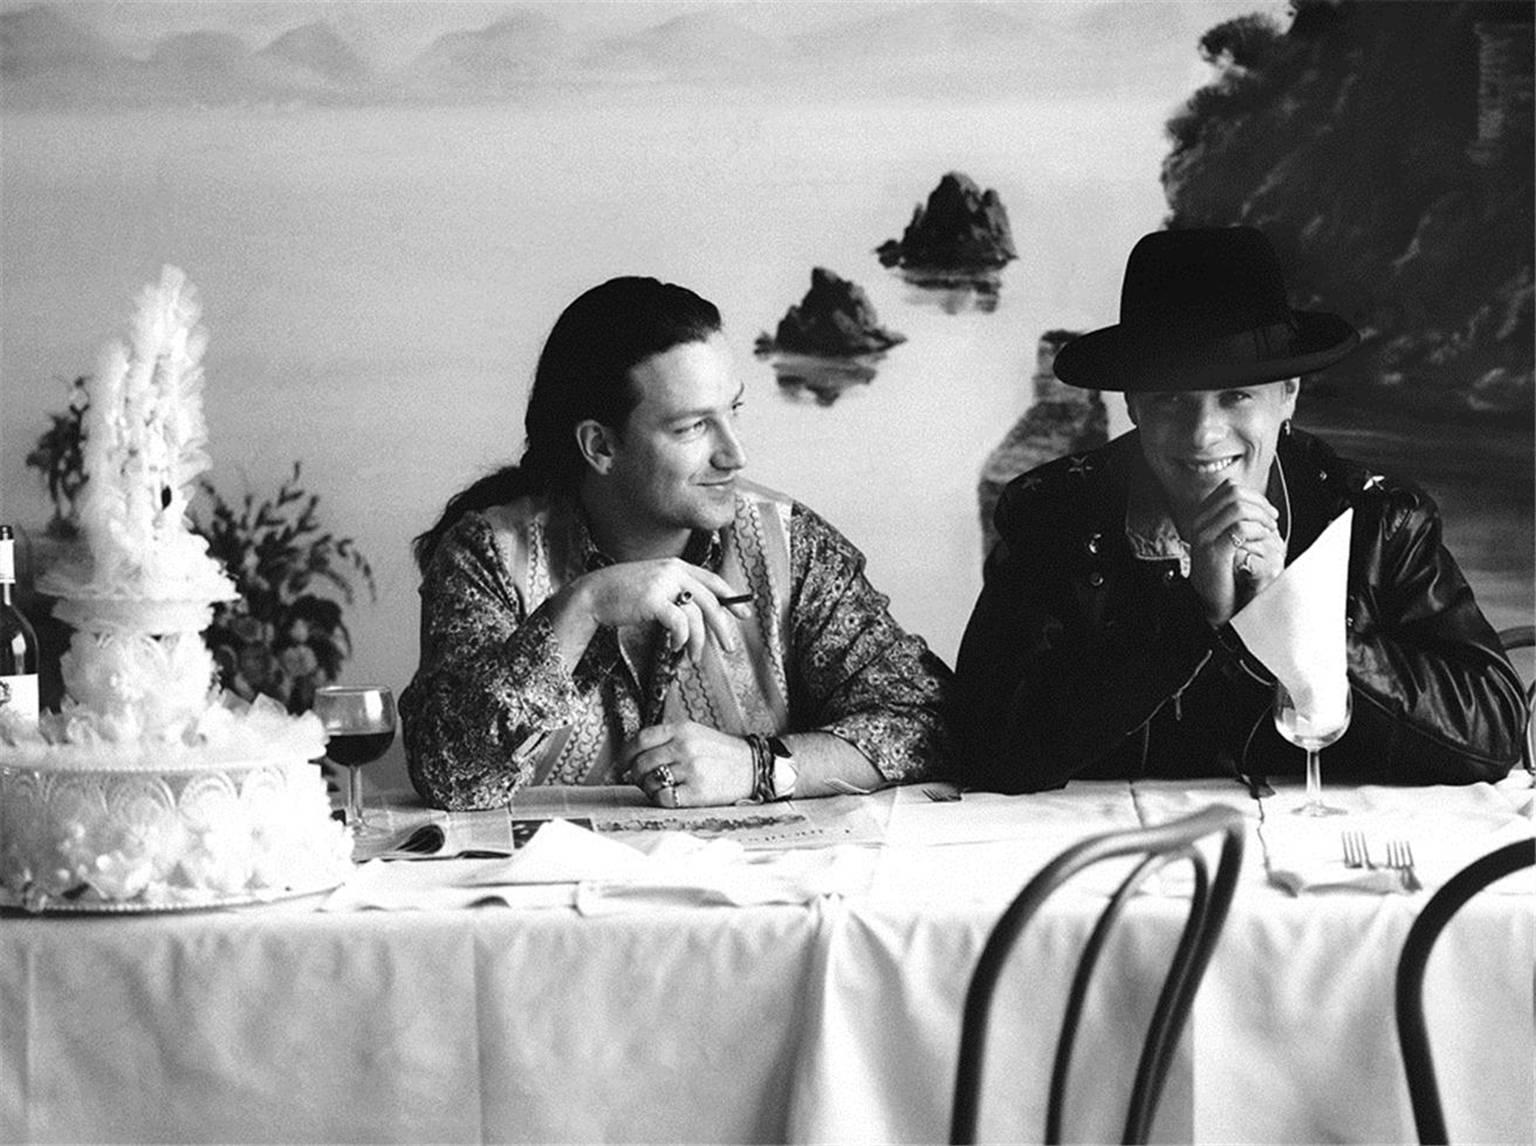 Colm Henry Black and White Photograph - U2, Bono & Larry Mullen Jr, Rome, Italy, 1989